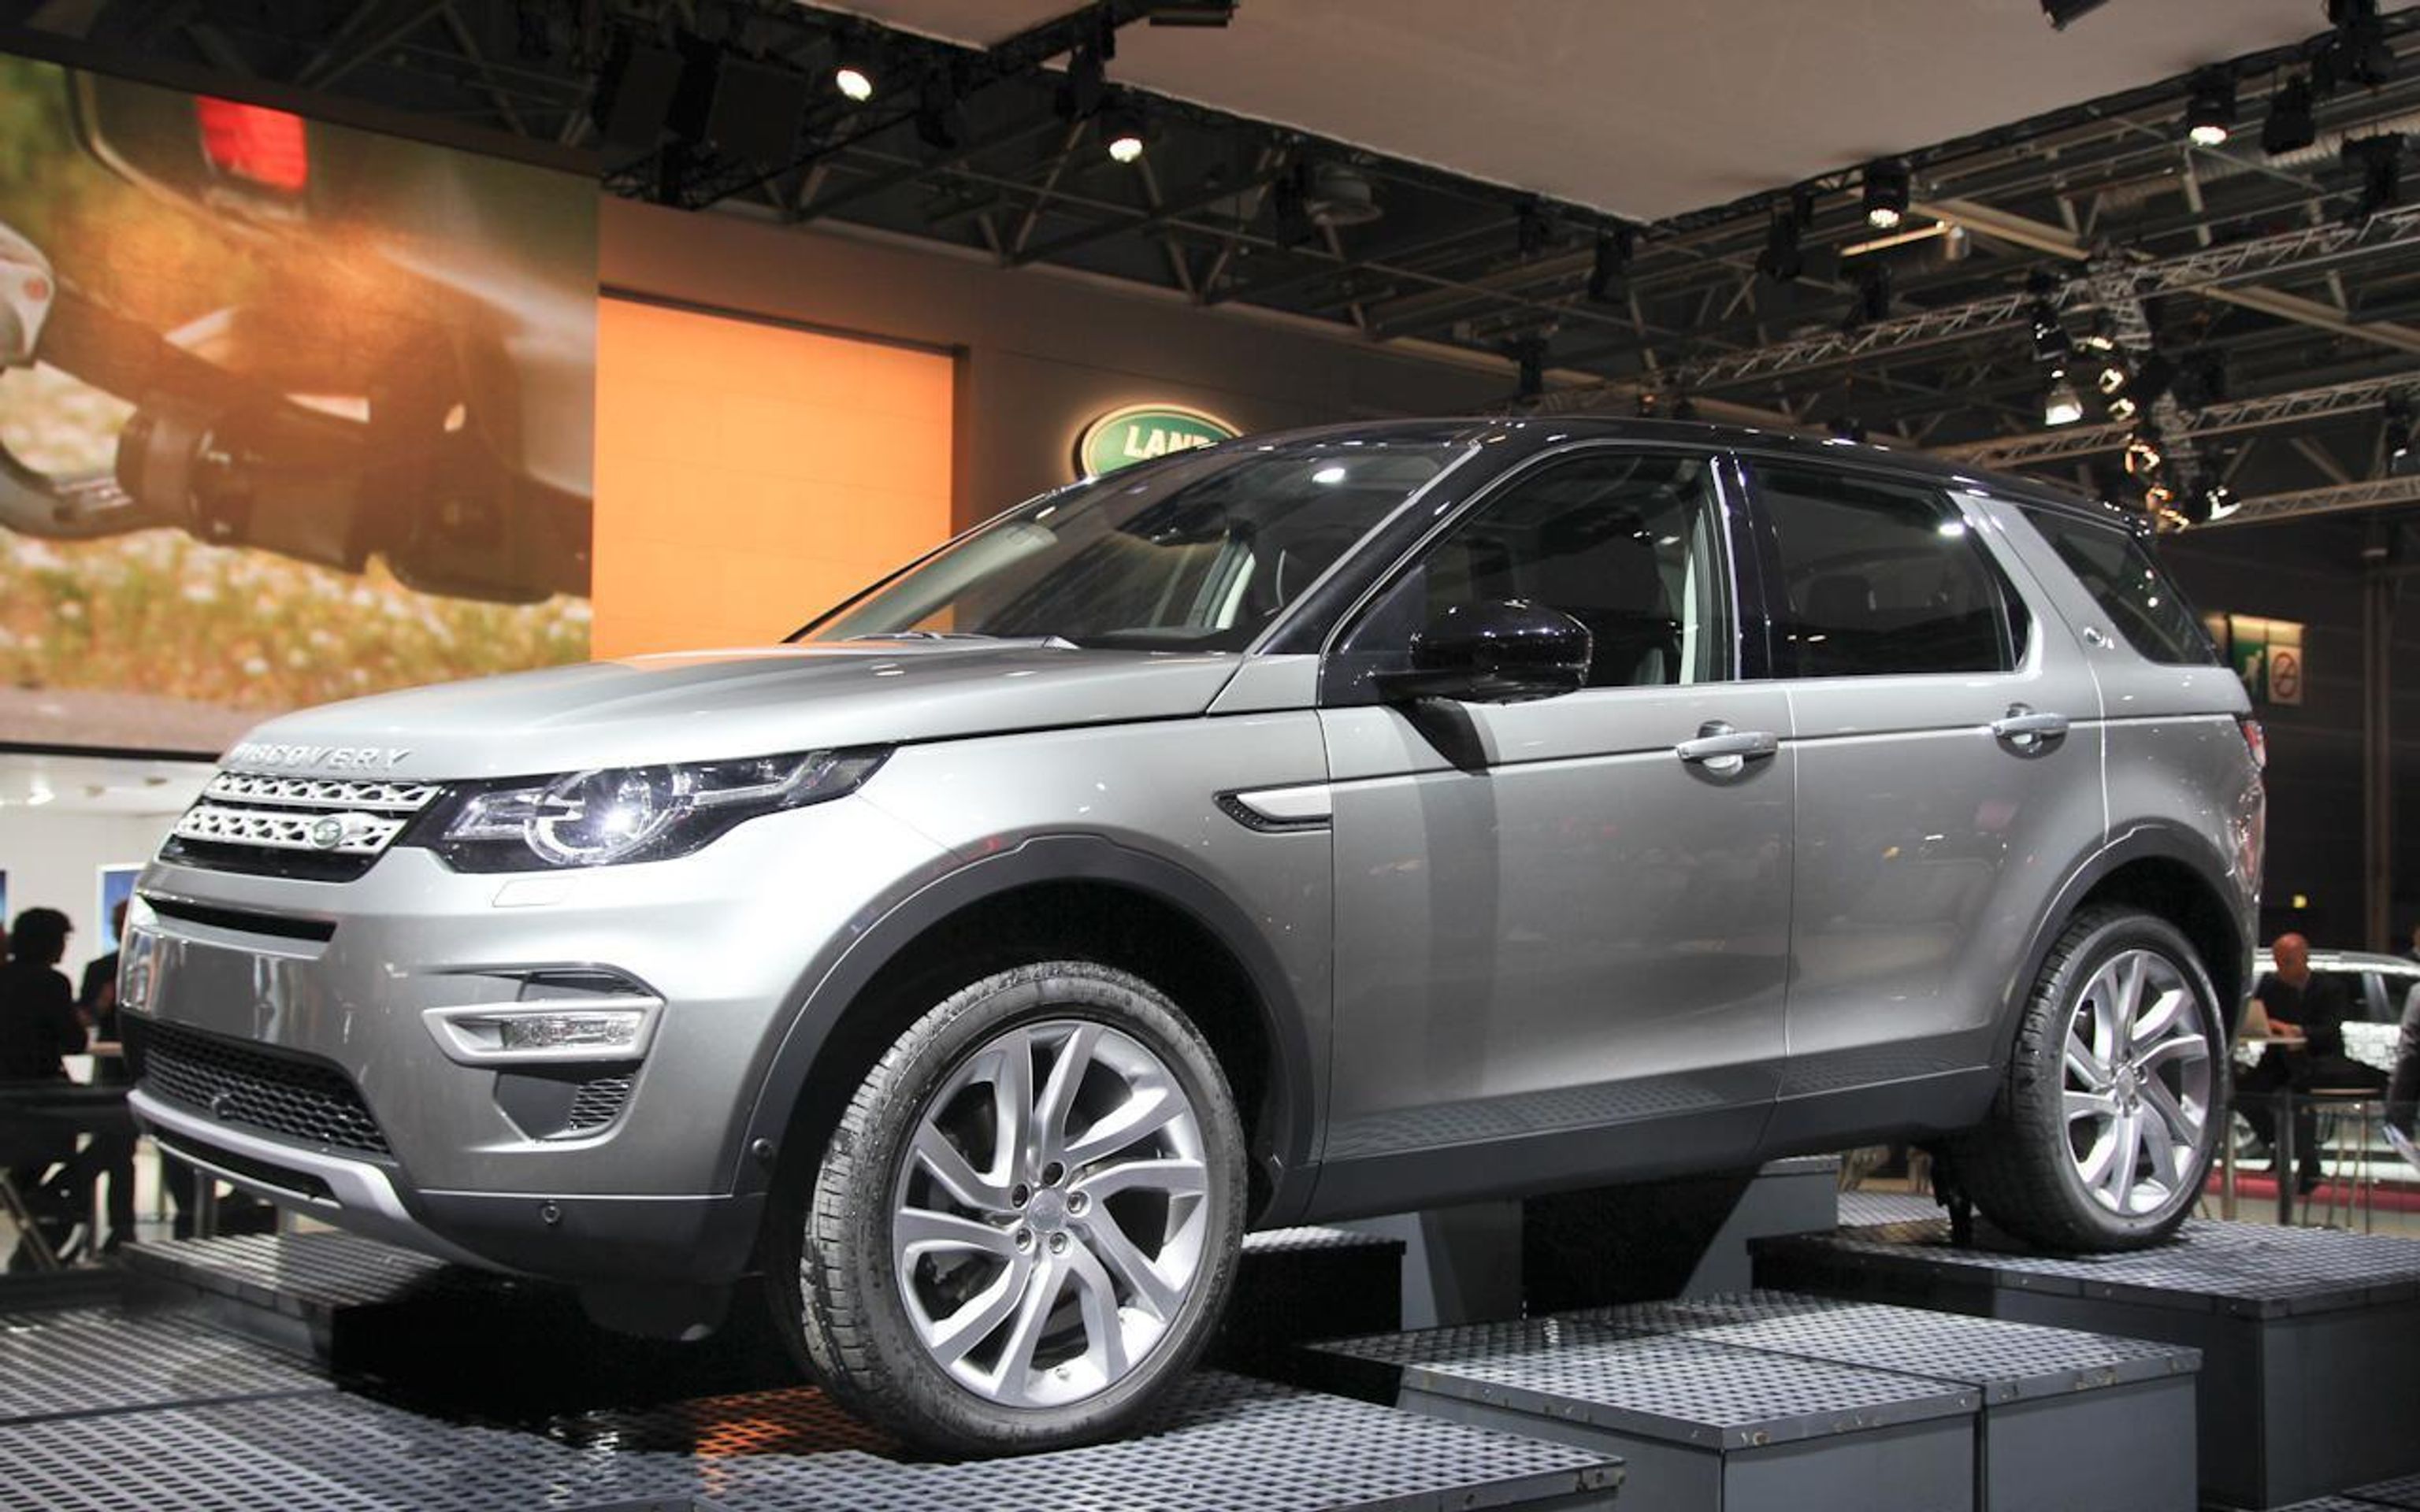 Discovery - 13 - GALERIE: Land Rover Discovery (2/7)